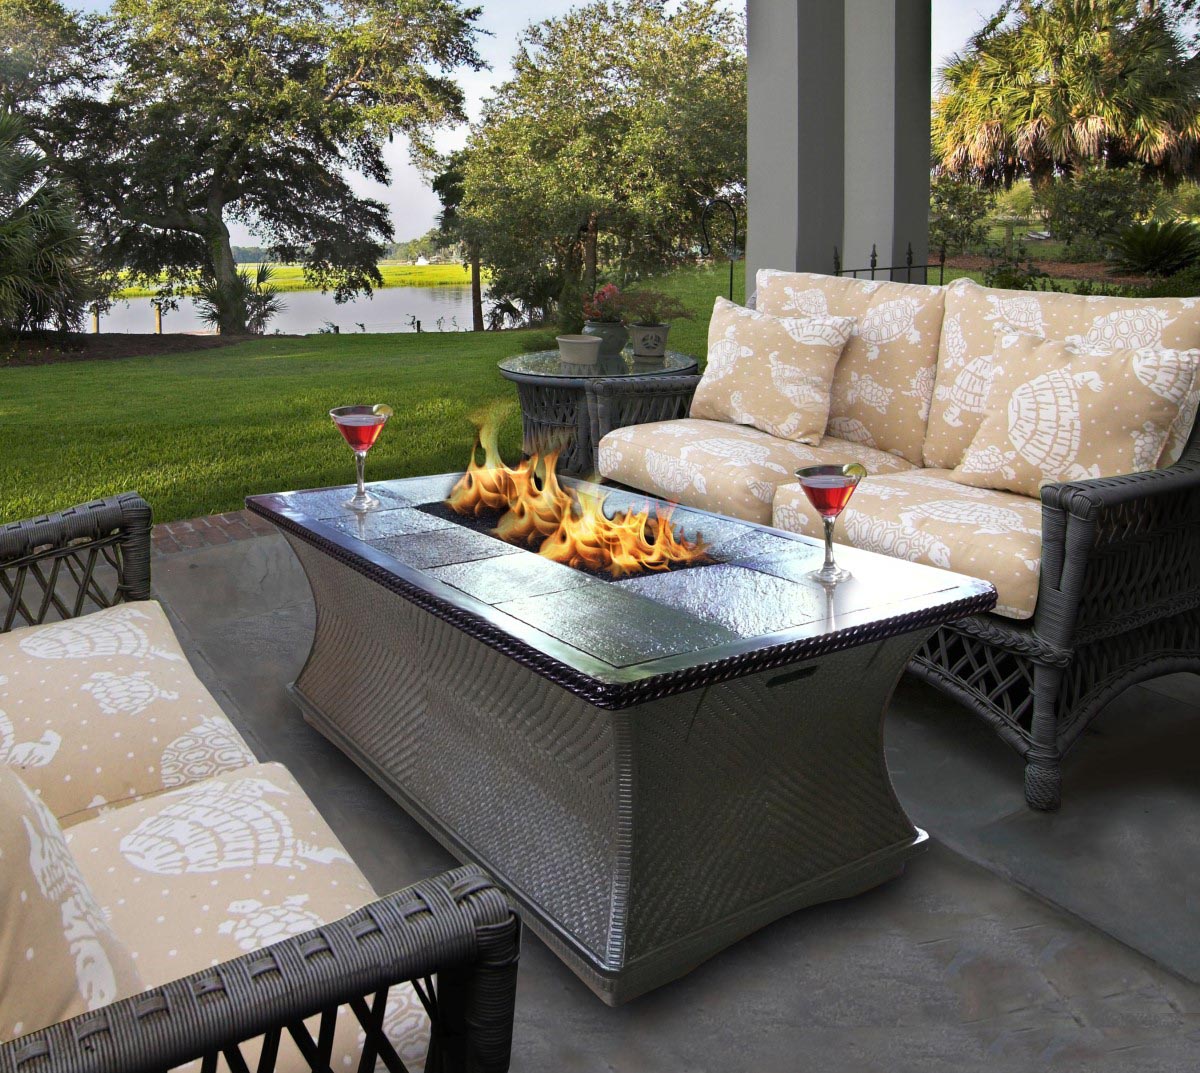 How to Make a DIY Fire Pit Table Top? | Fire Pit Design Ideas